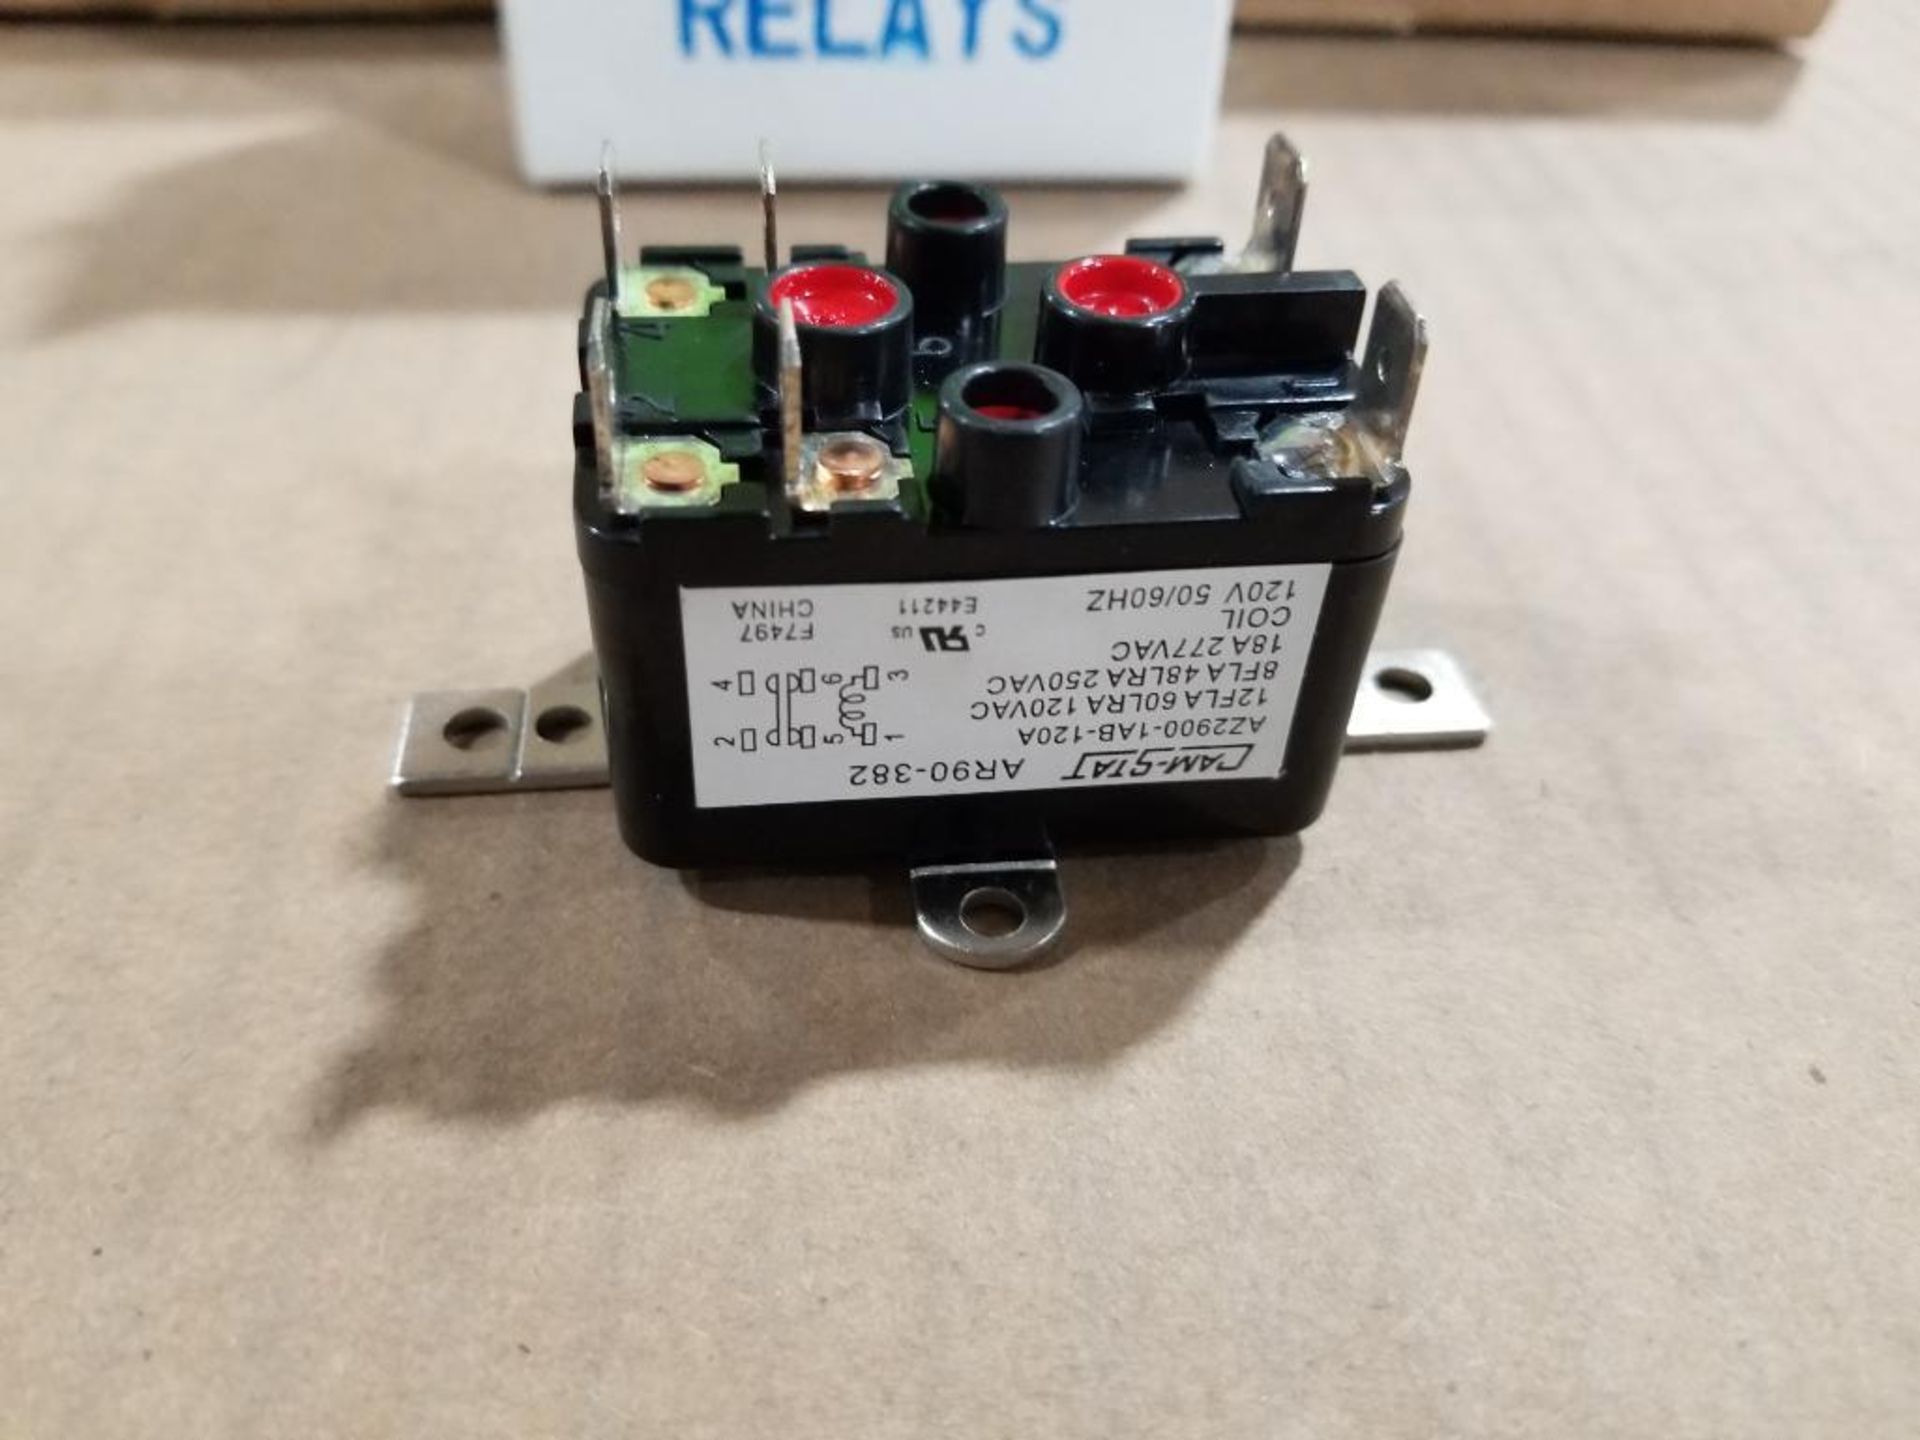 Qty 50 - Cam-stat general purpose relay. Part number AZ2900-1AB-120A. - Image 6 of 7